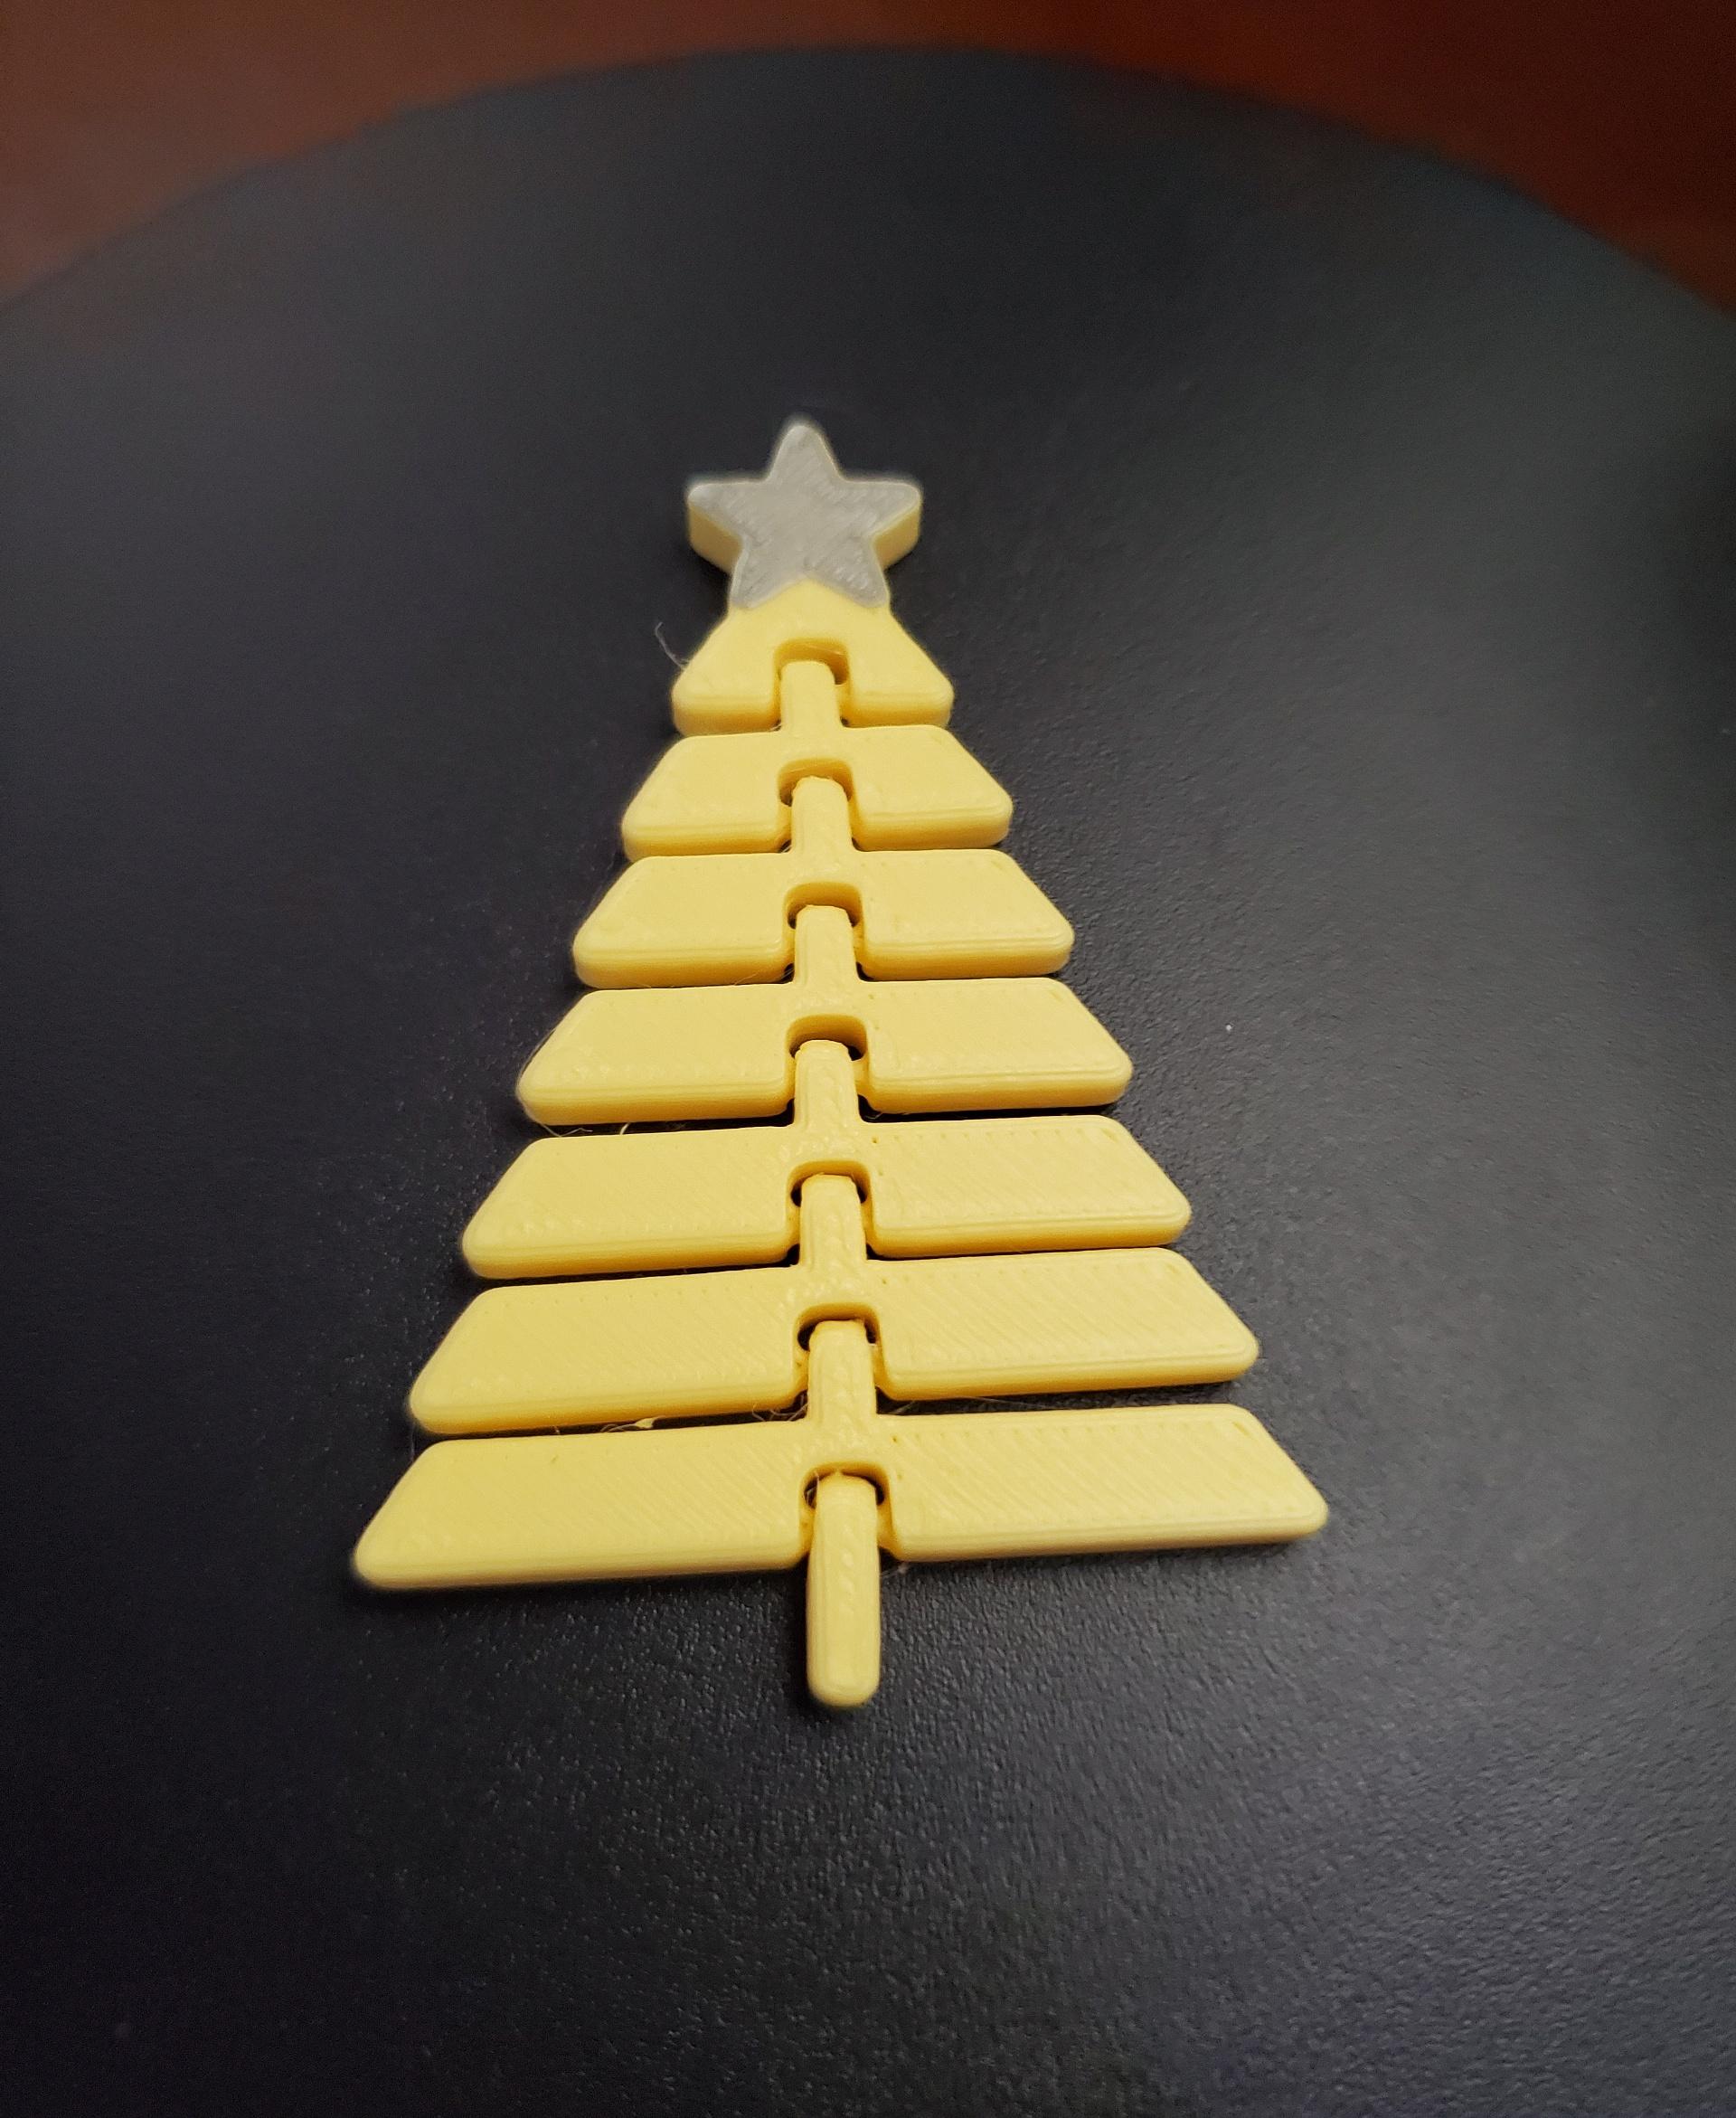 Articulated Christmas Tree with Star - Print in place fidget toy - 3mf - polyterra banana - 3d model